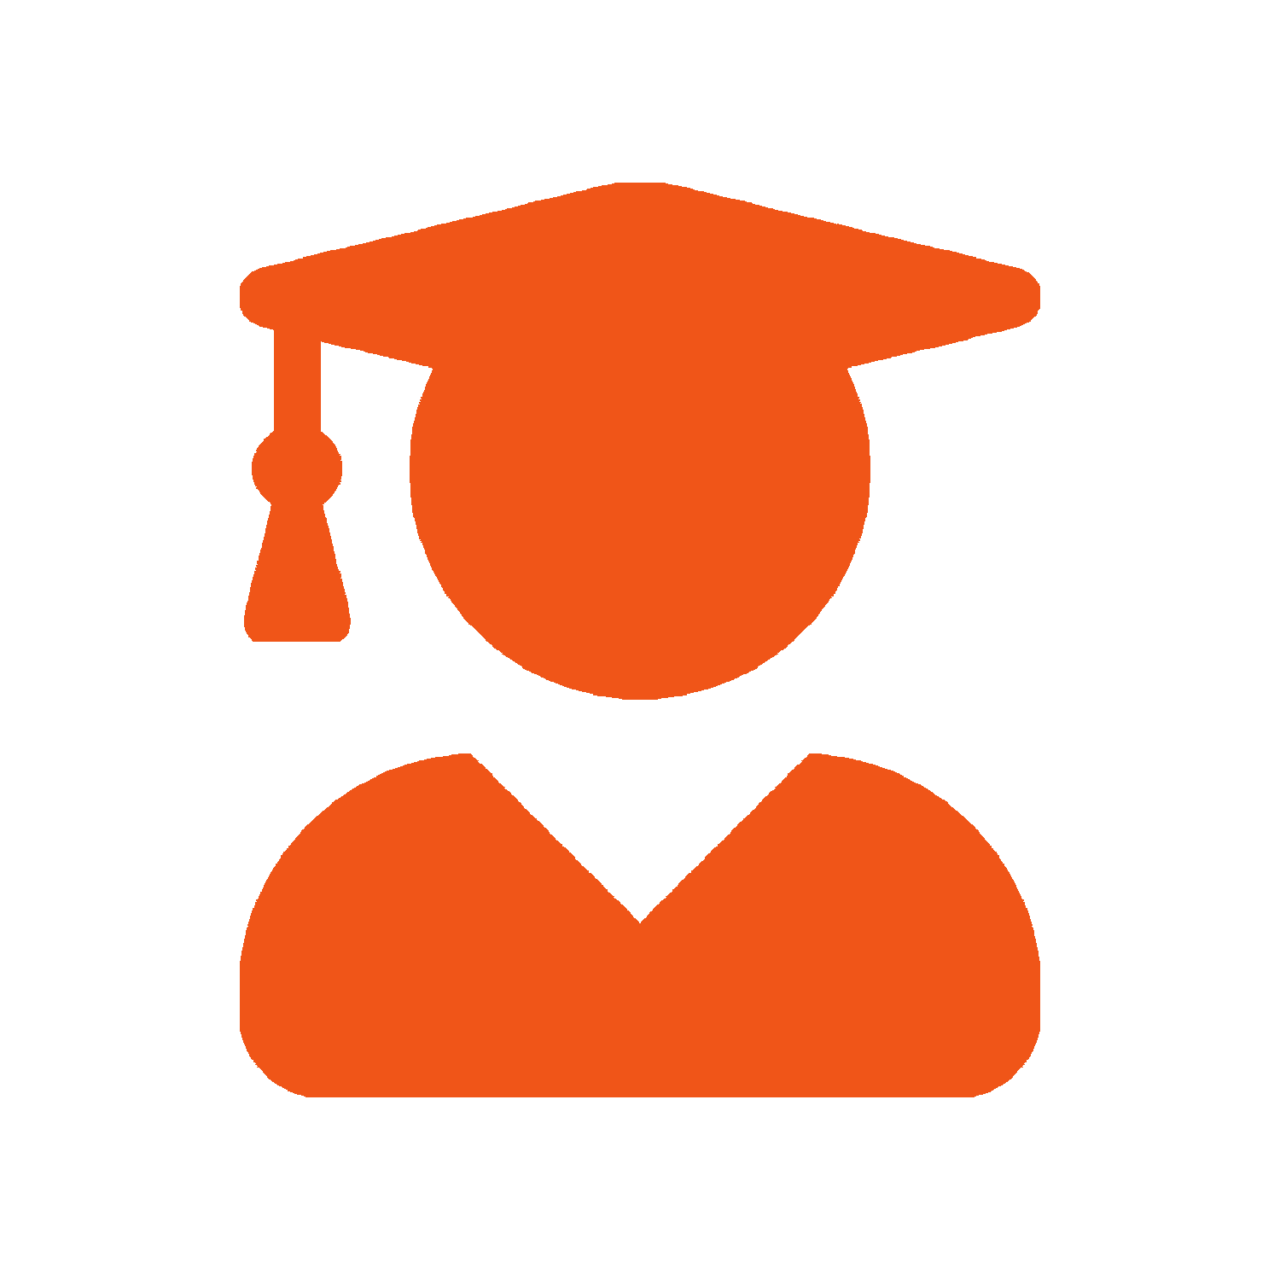 Data Education - Student with cap and gown